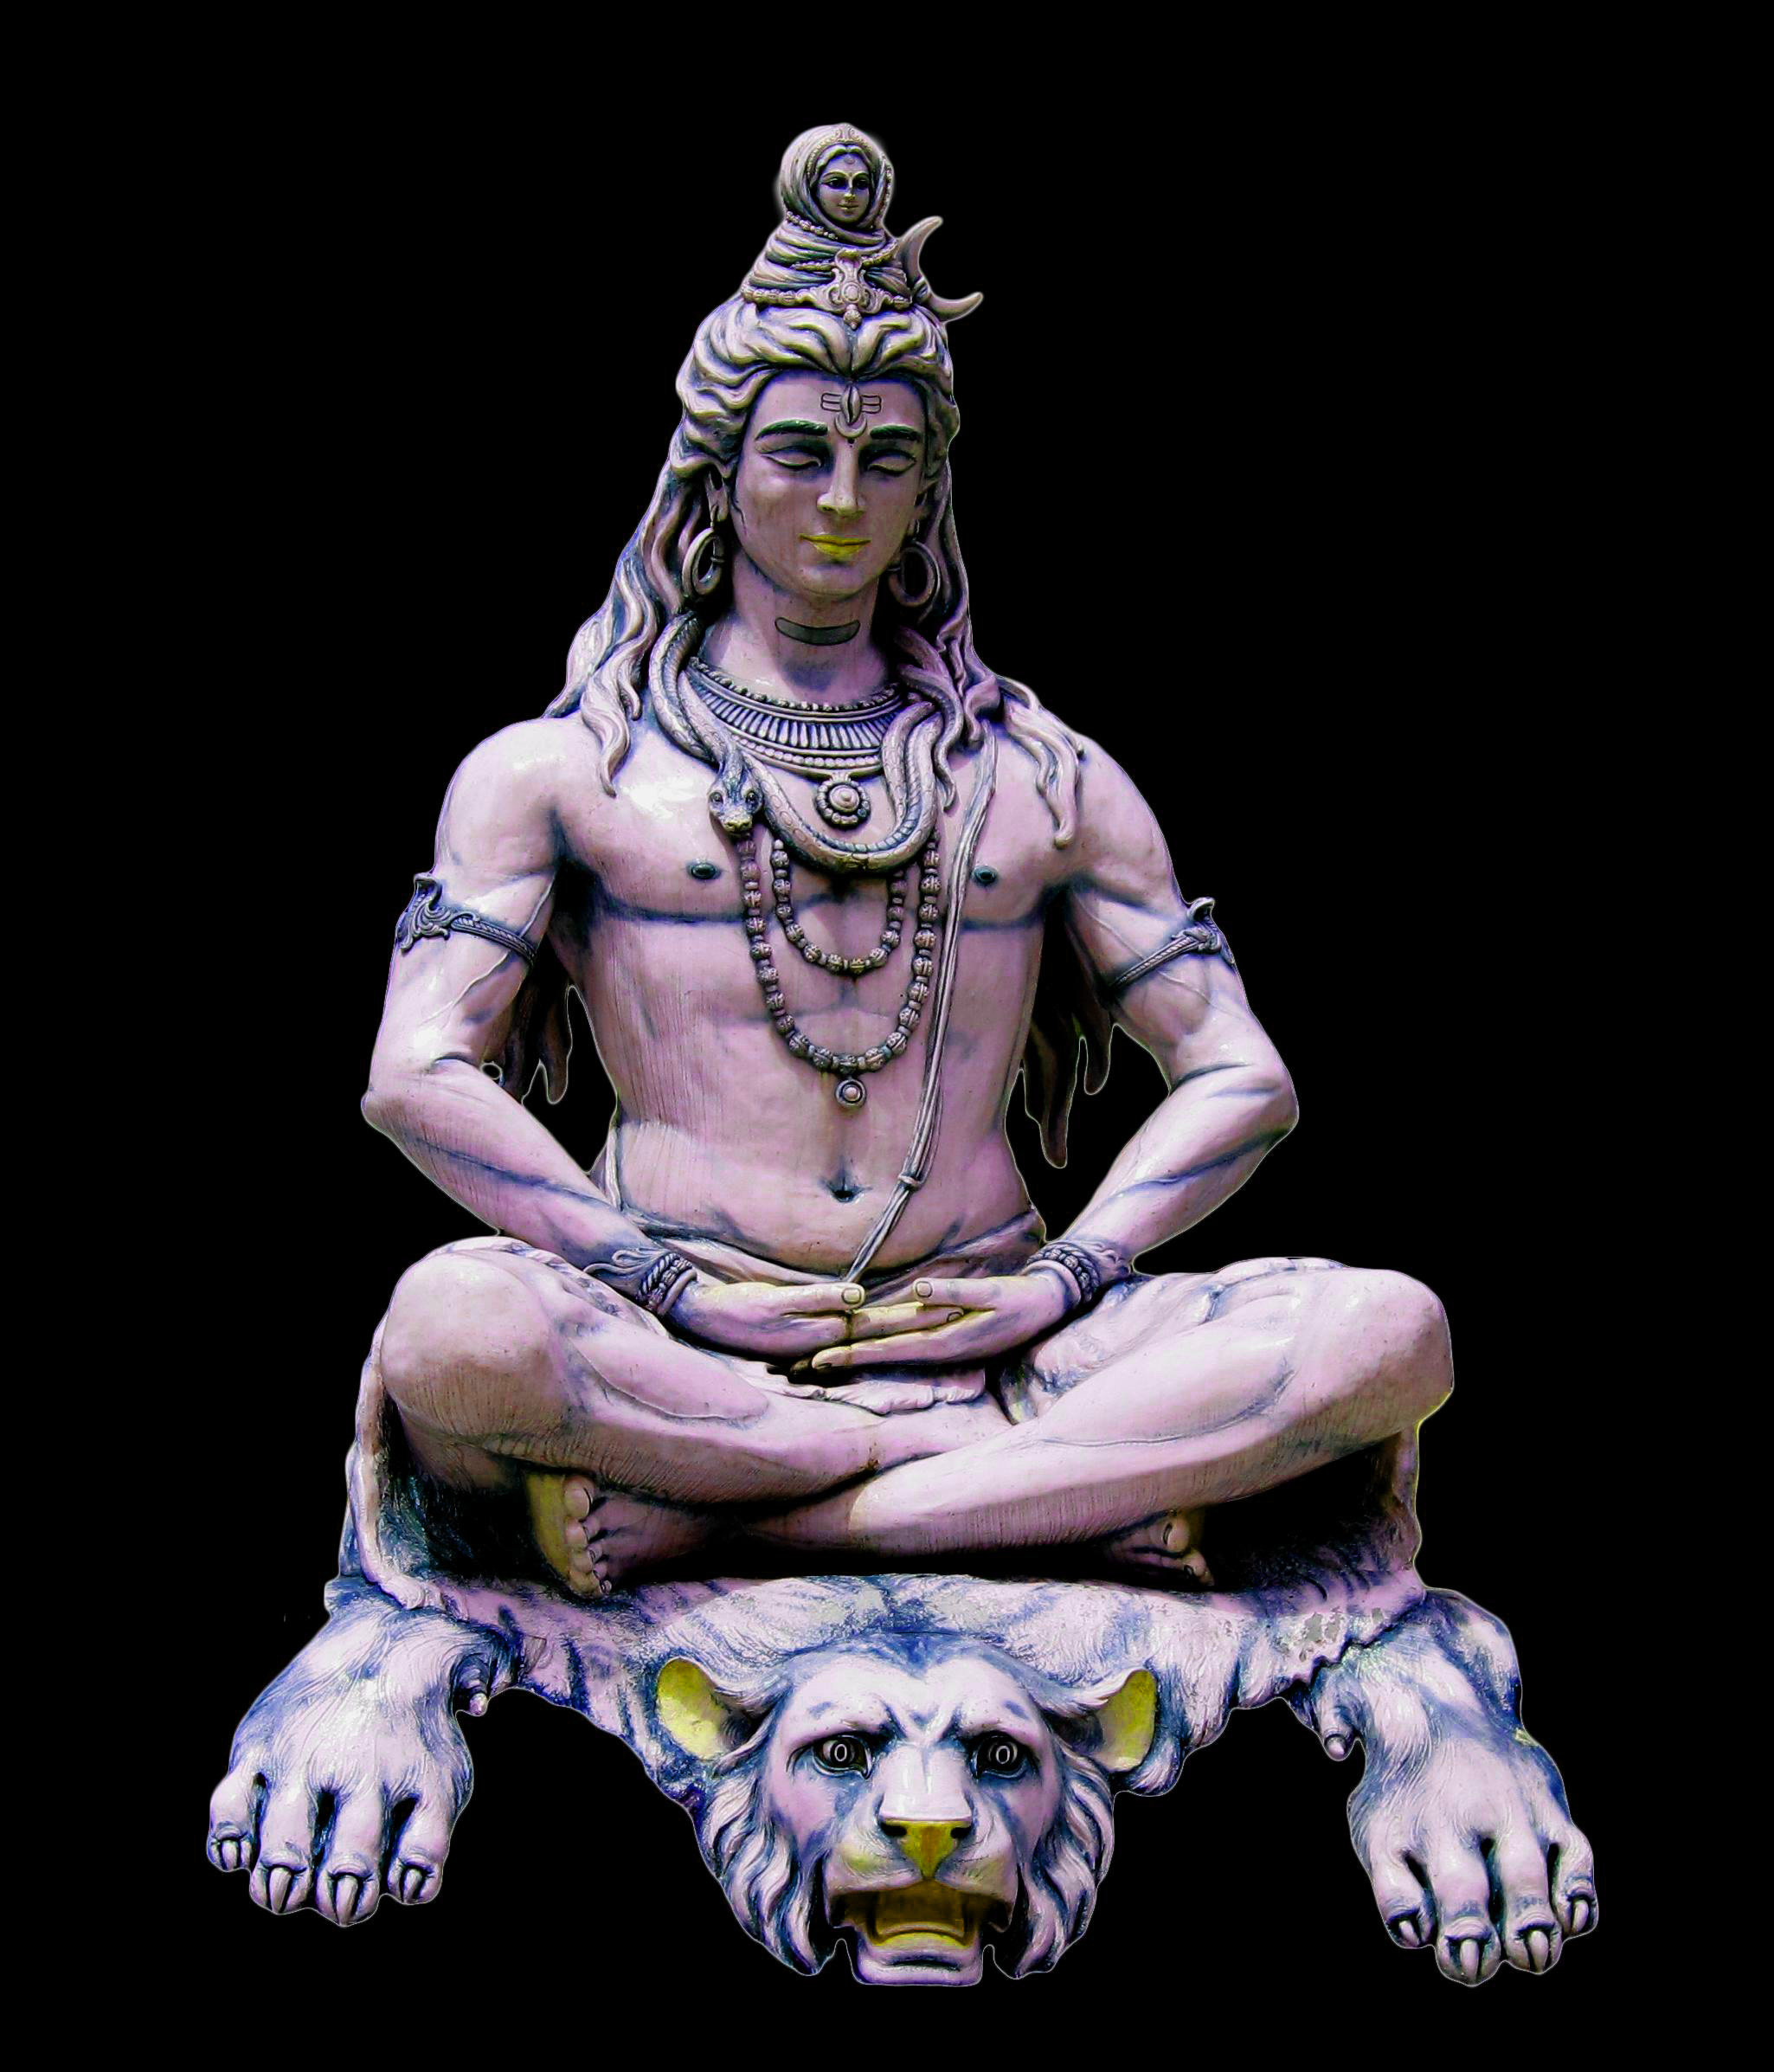 New Free 1080p Lord Shiva Images Photo Download